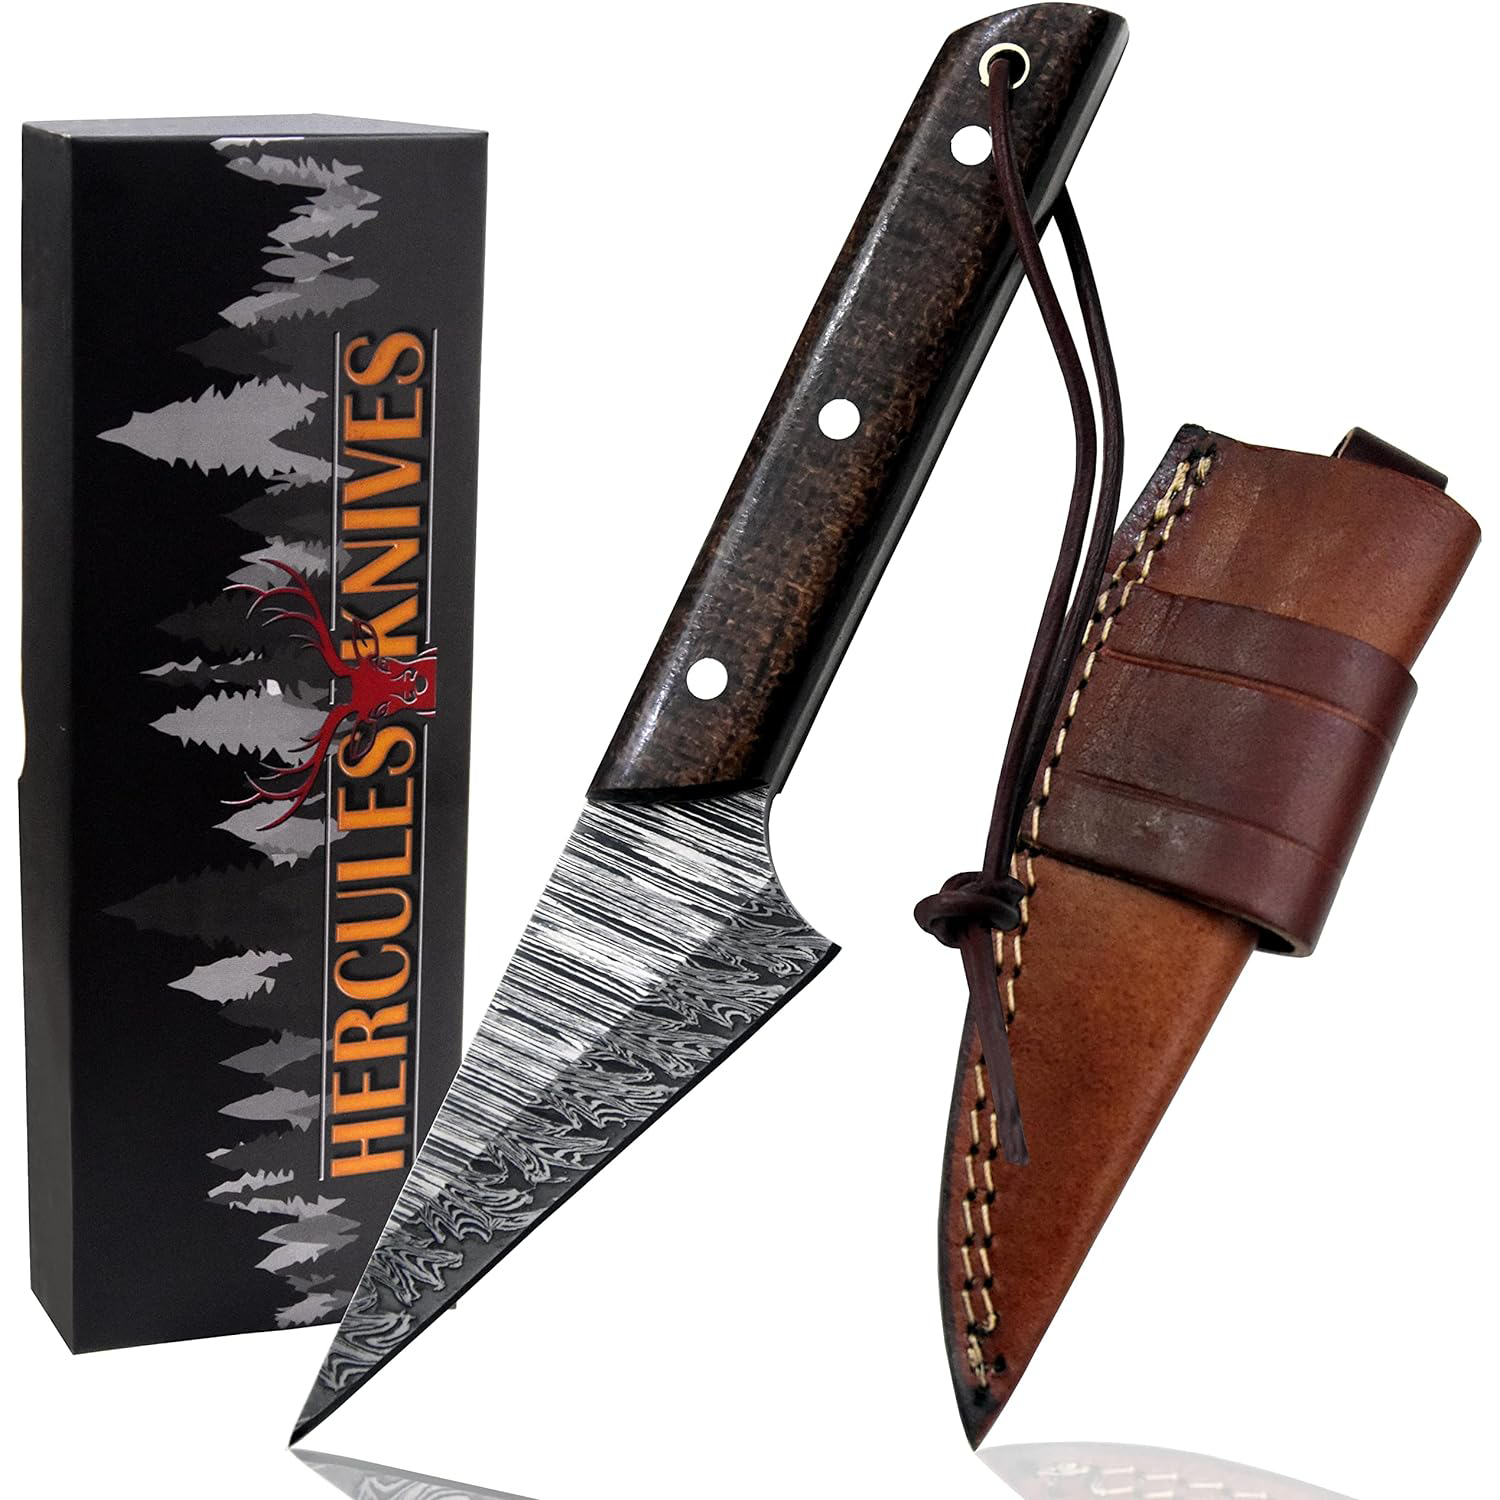 KD Hand Forged Hunting Knife Damascus Steel G-10 Micarta Handle with Gift Box